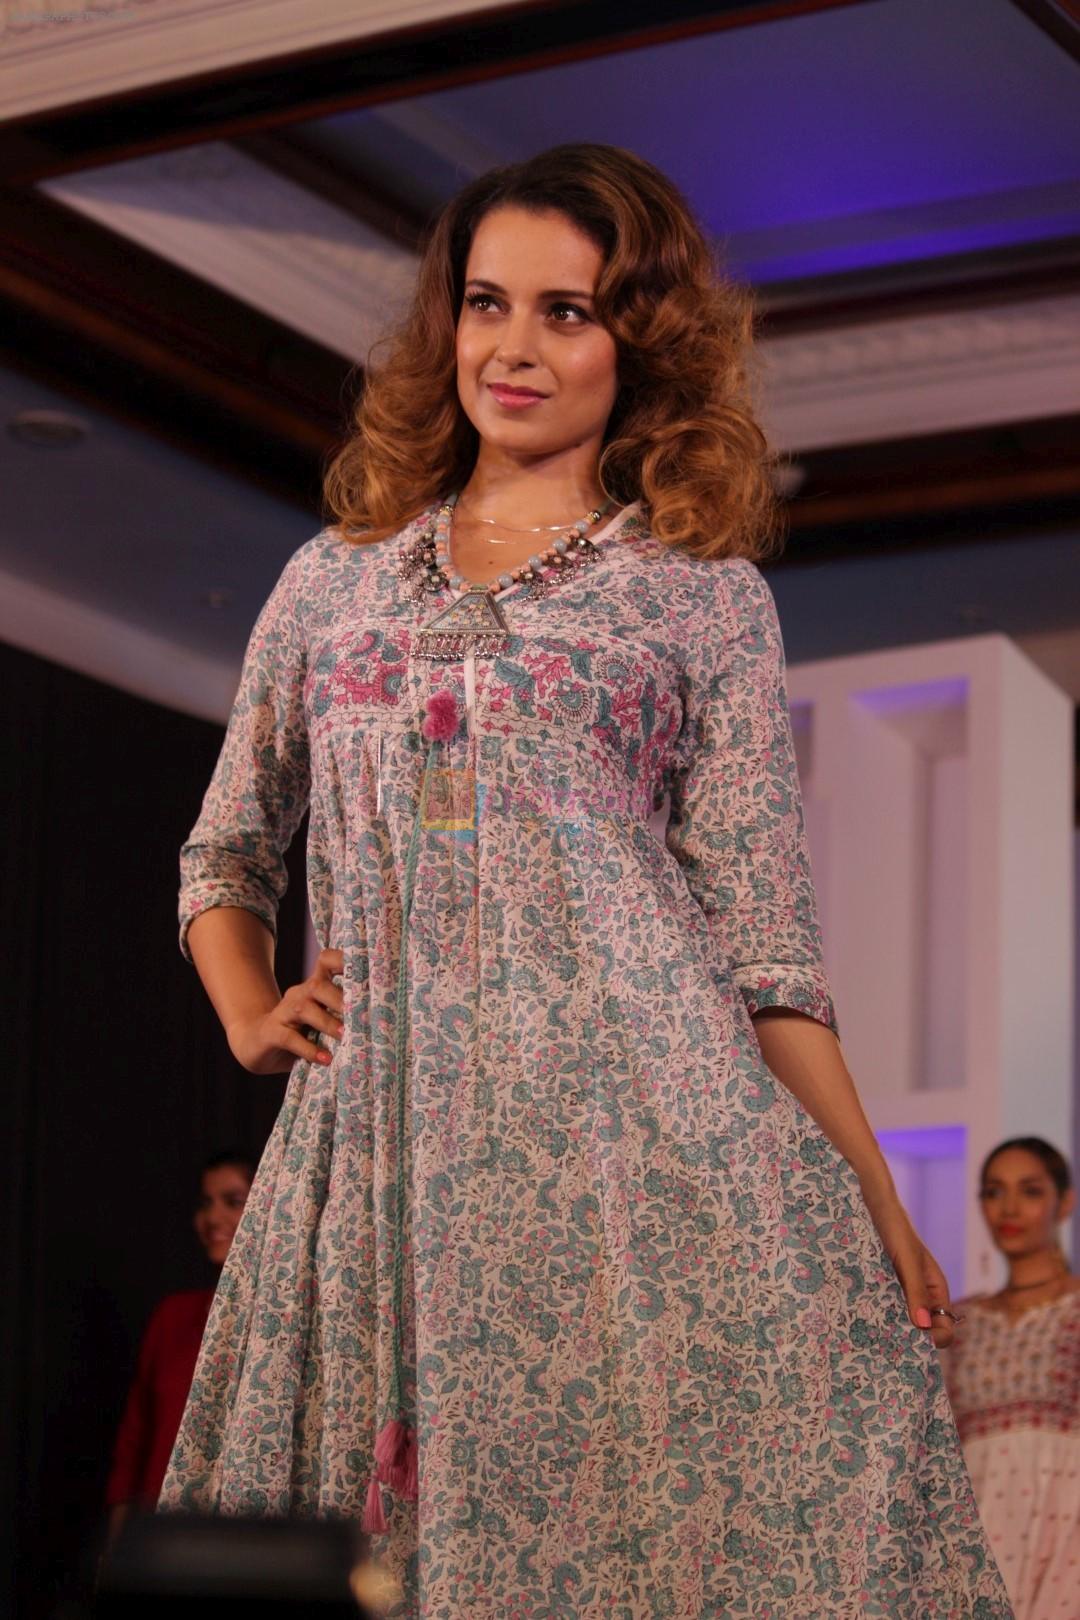 Kangana Ranaut Walk On Ramp For Lifestyle Discover The Latest Collection on 14th April 2017